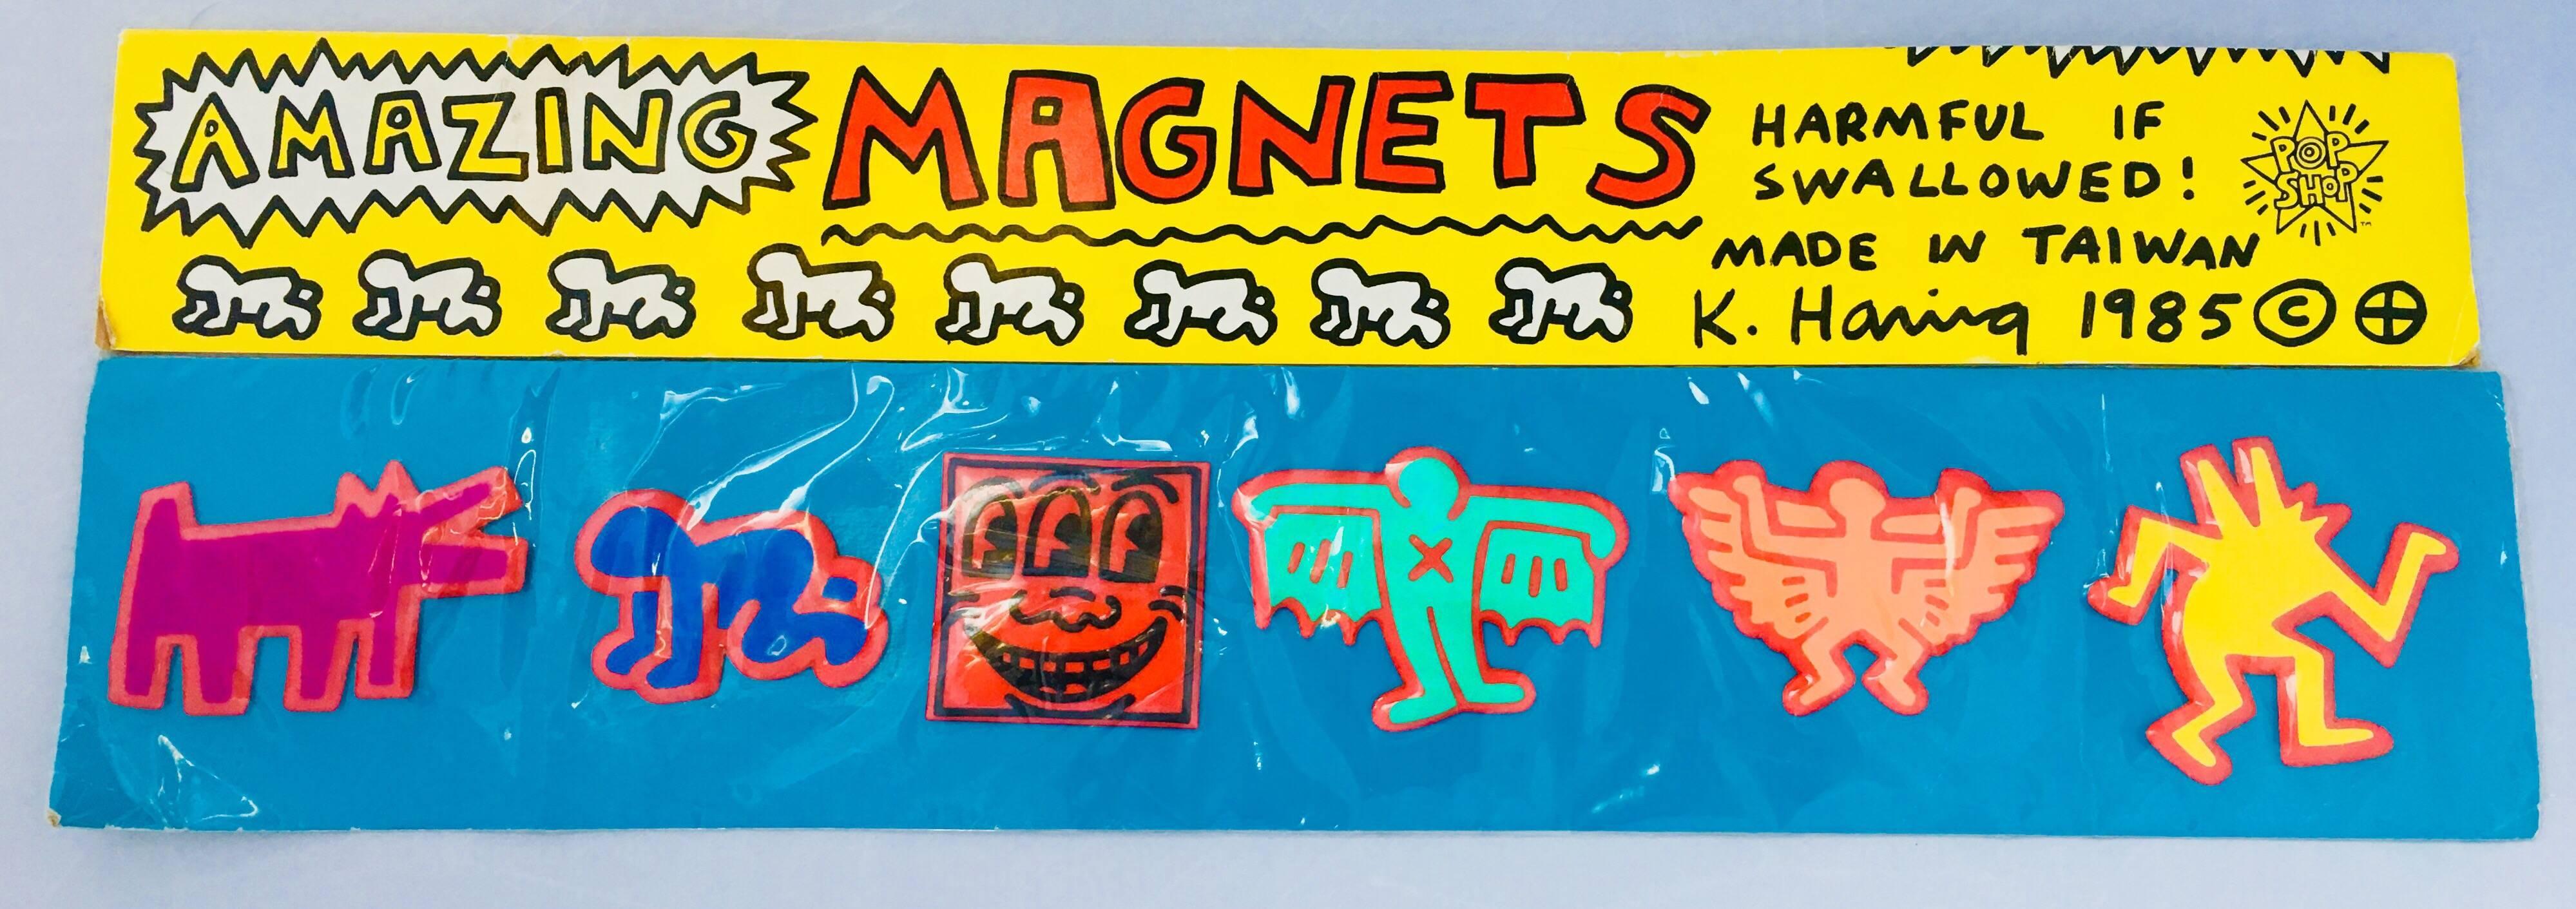 keith haring magnet